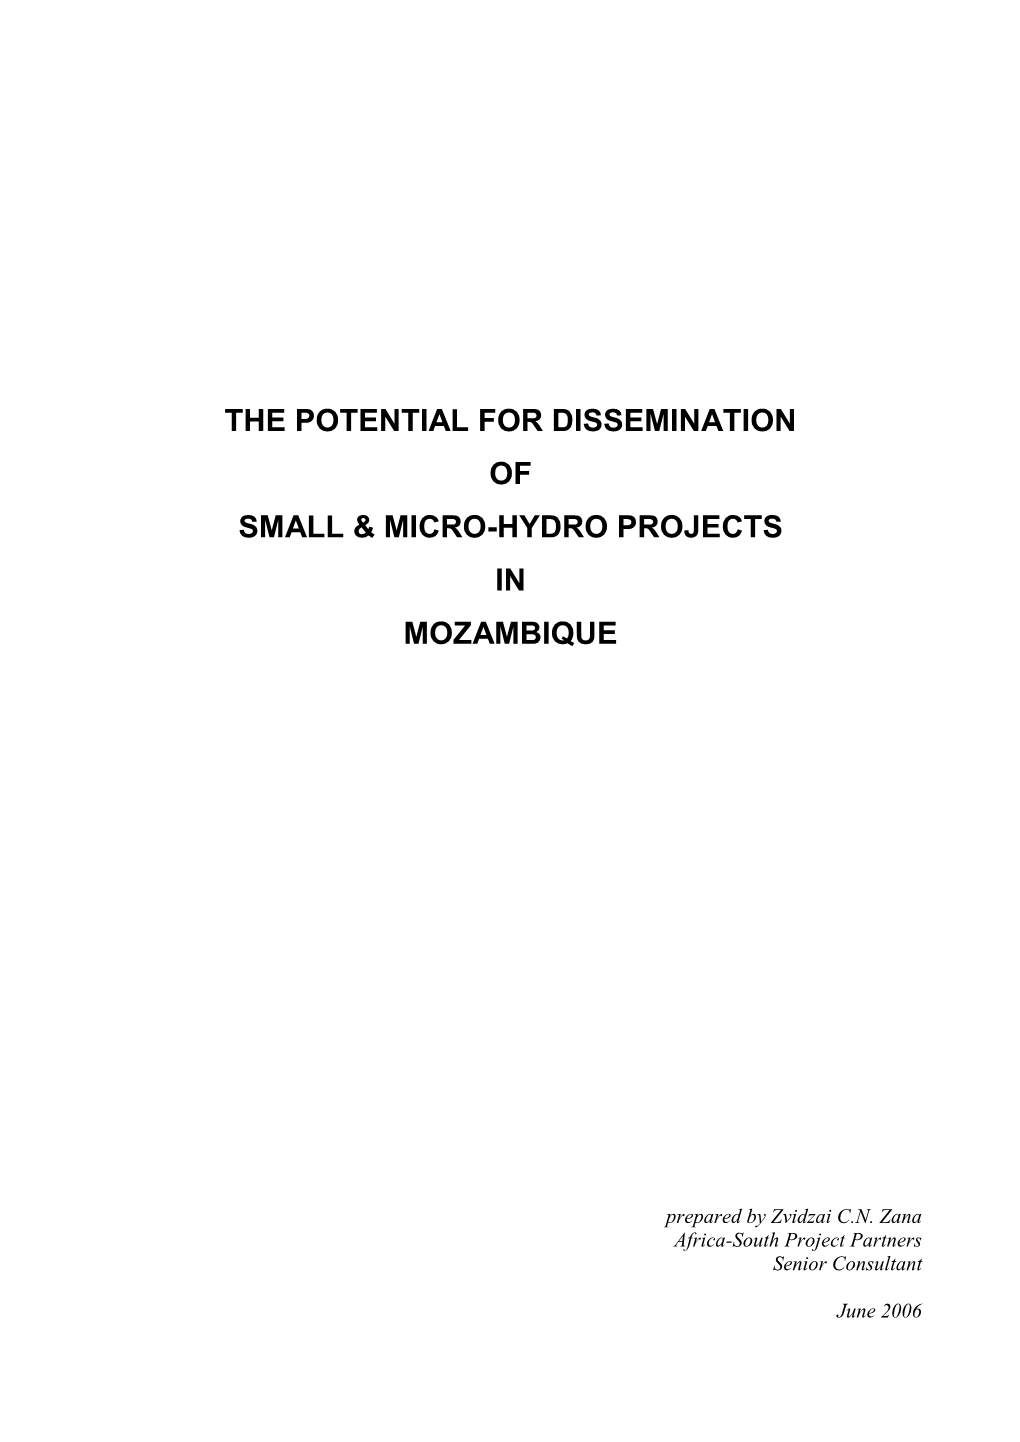 The Potential for Dissemination of Small & Micro-Hydro